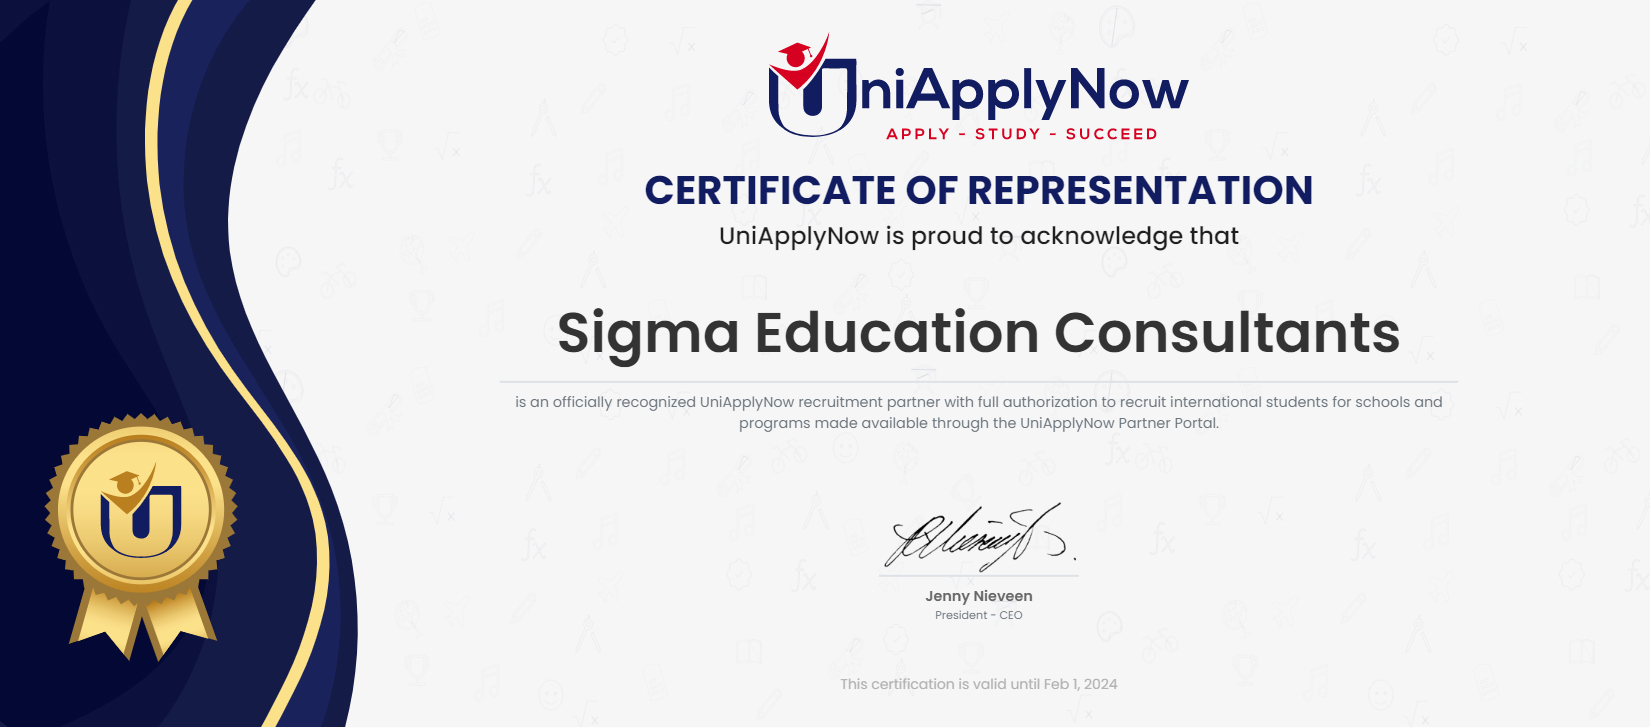 UniApplyNow Certificate